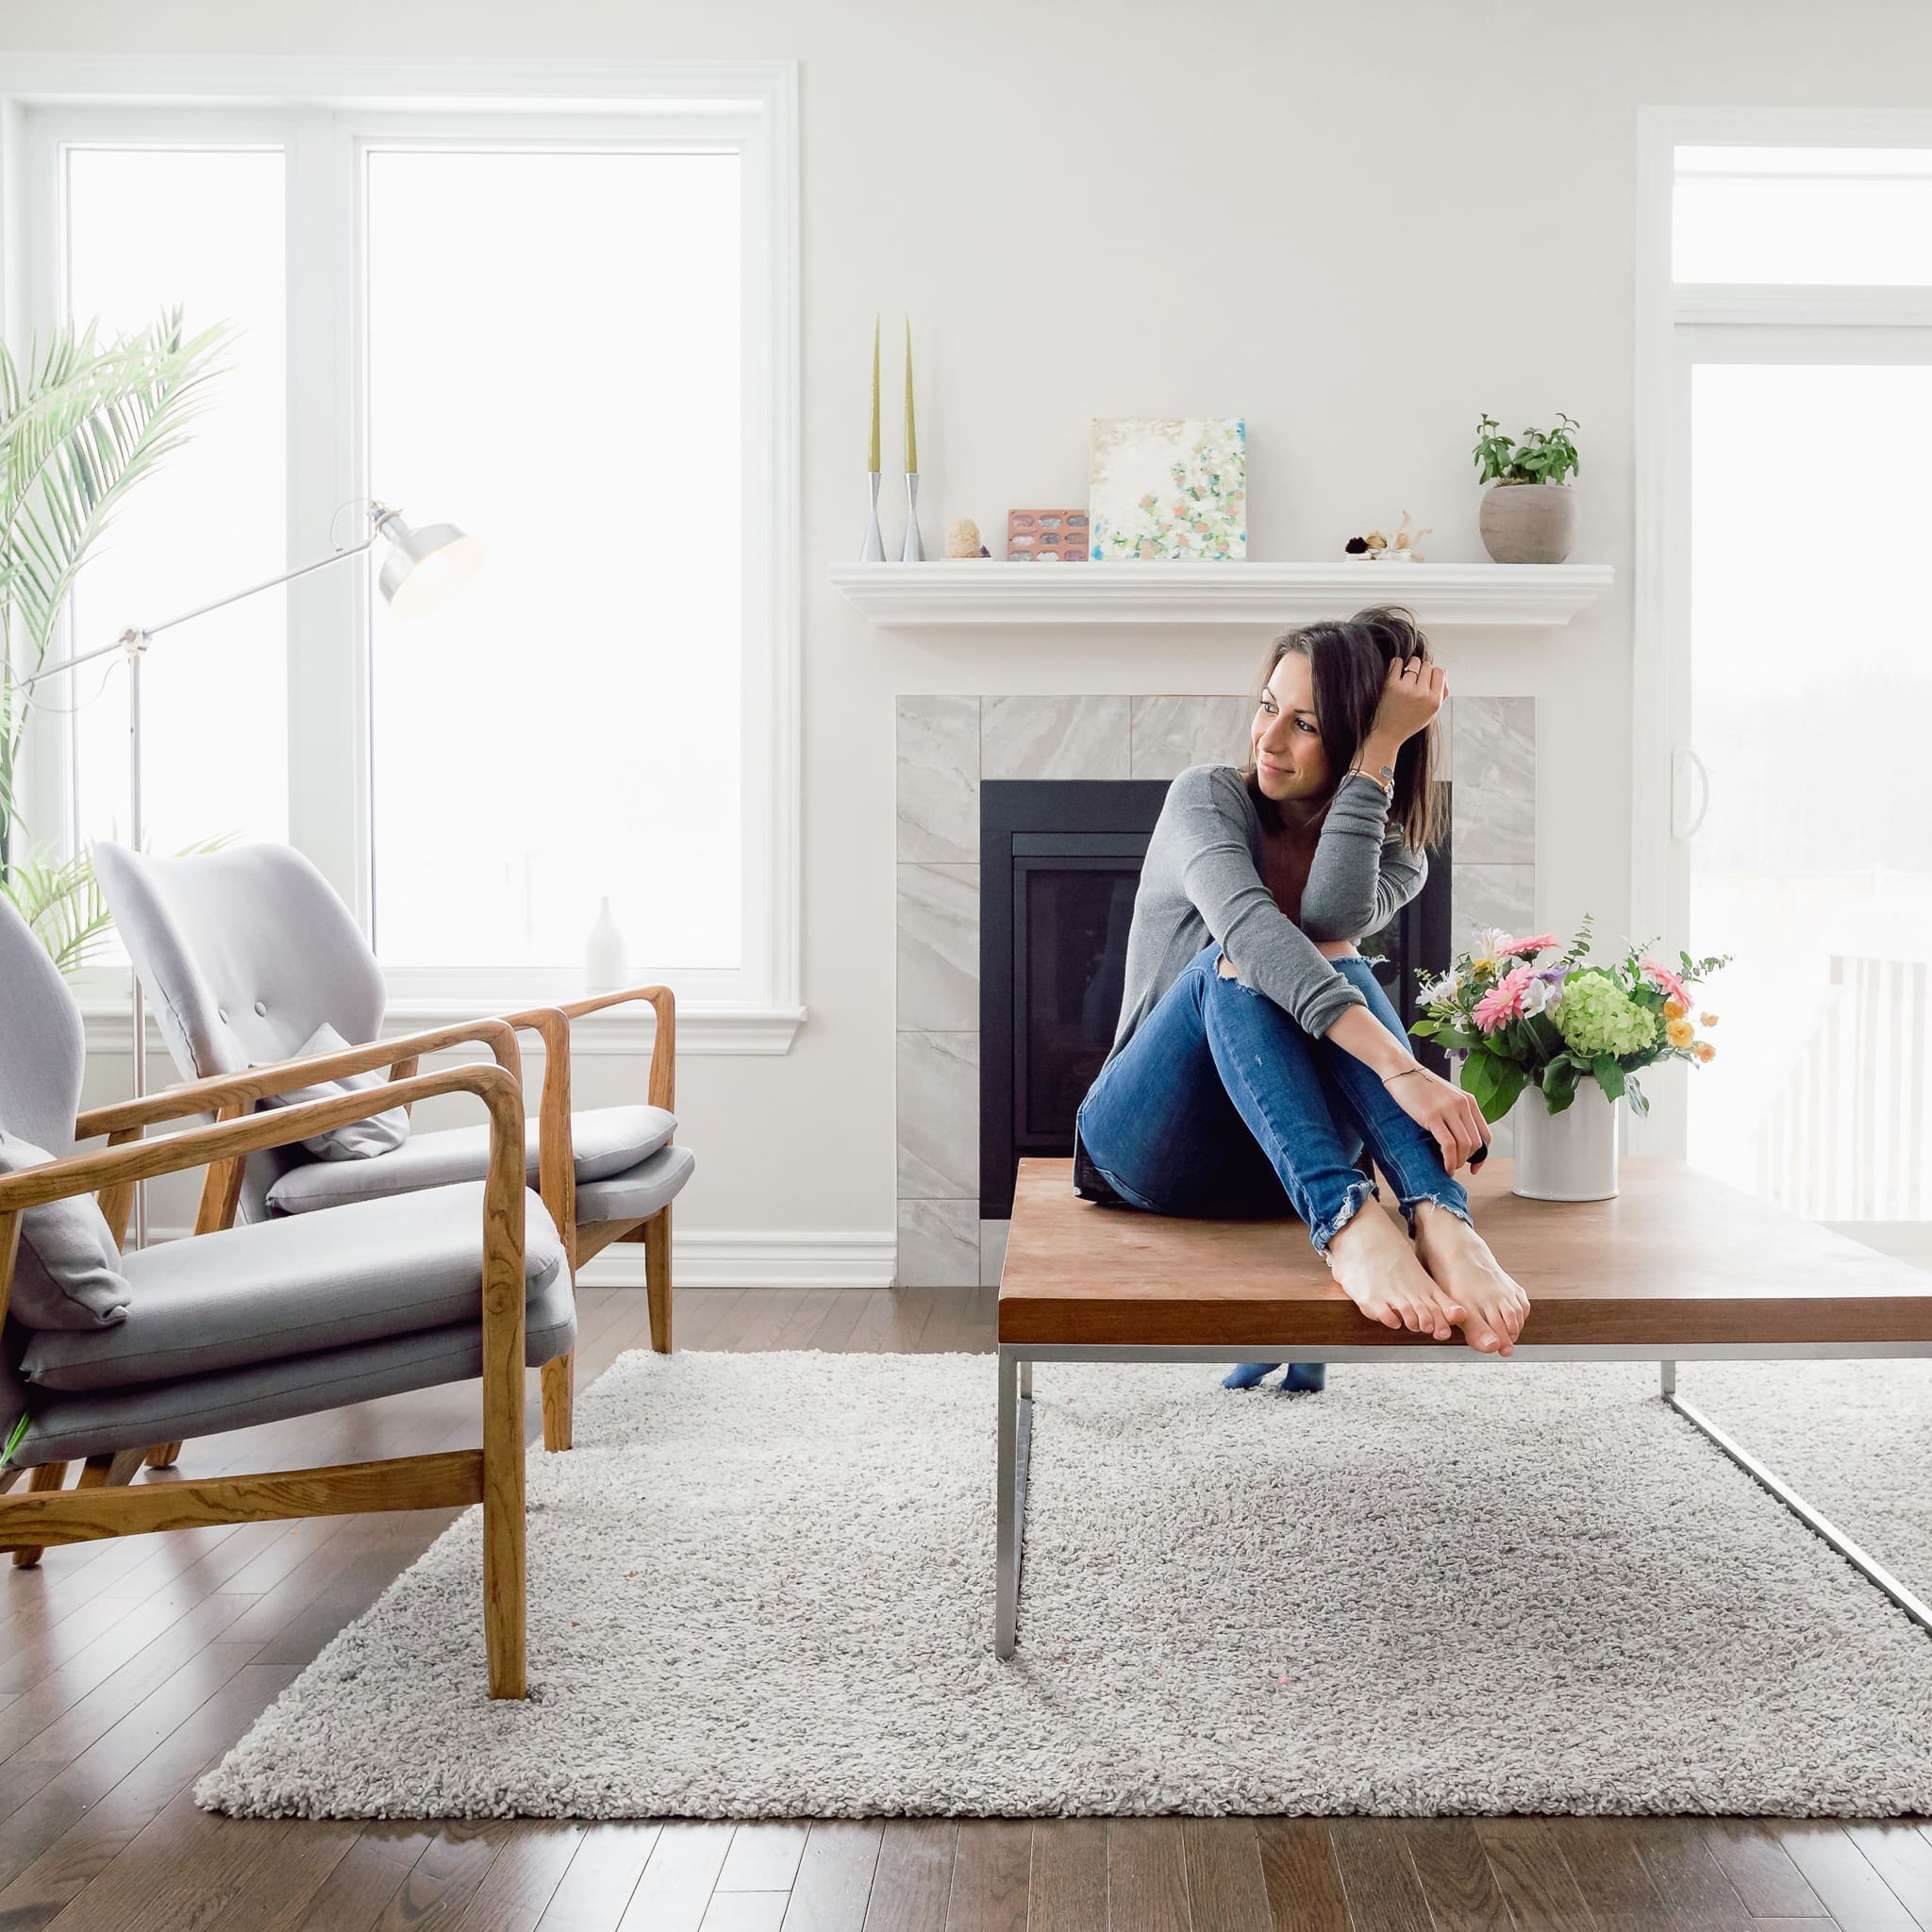 6 ways to make your home feel bigger